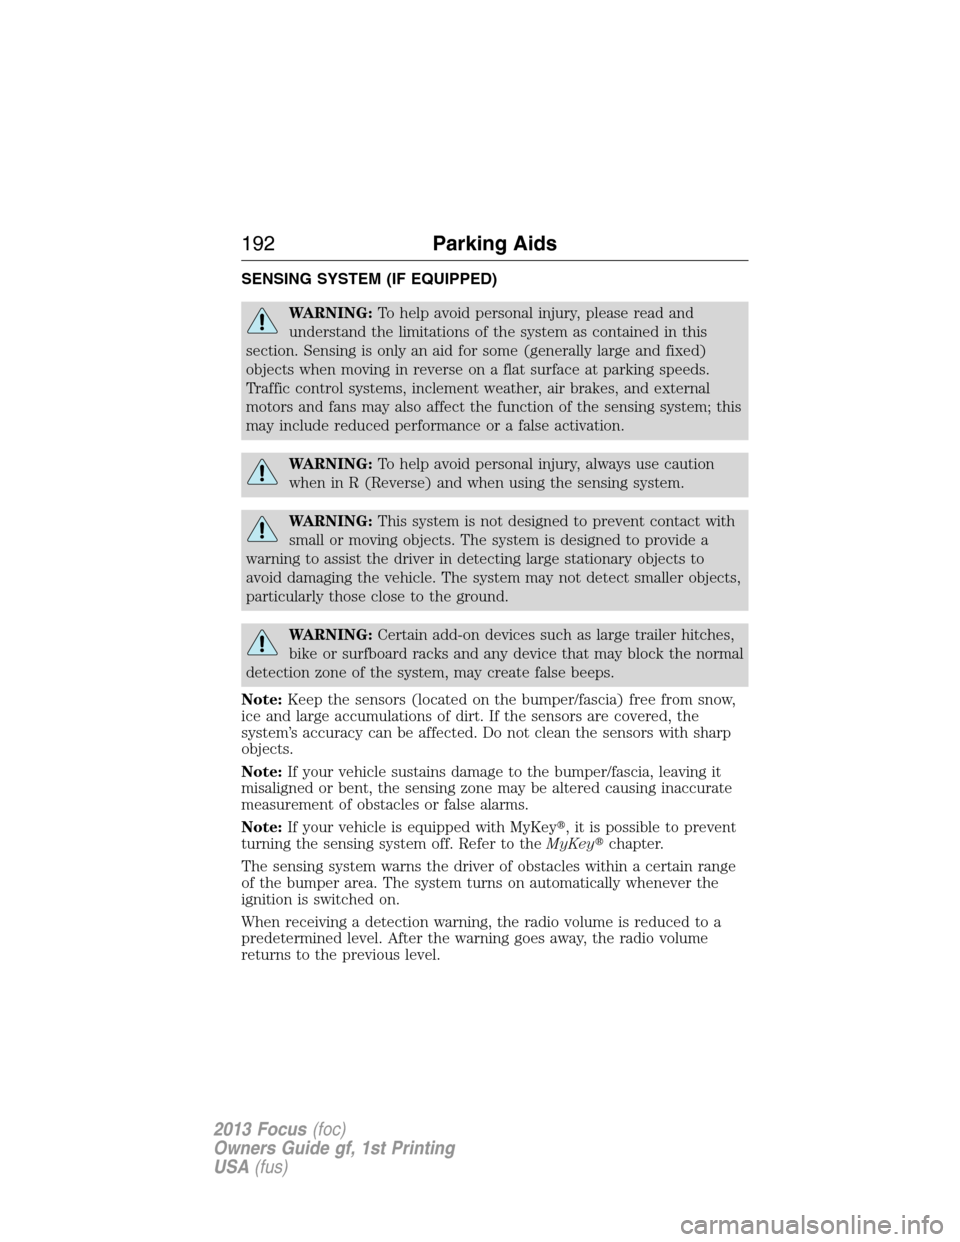 FORD FOCUS 2013 3.G Owners Manual SENSING SYSTEM (IF EQUIPPED)
WARNING:To help avoid personal injury, please read and
understand the limitations of the system as contained in this
section. Sensing is only an aid for some (generally la